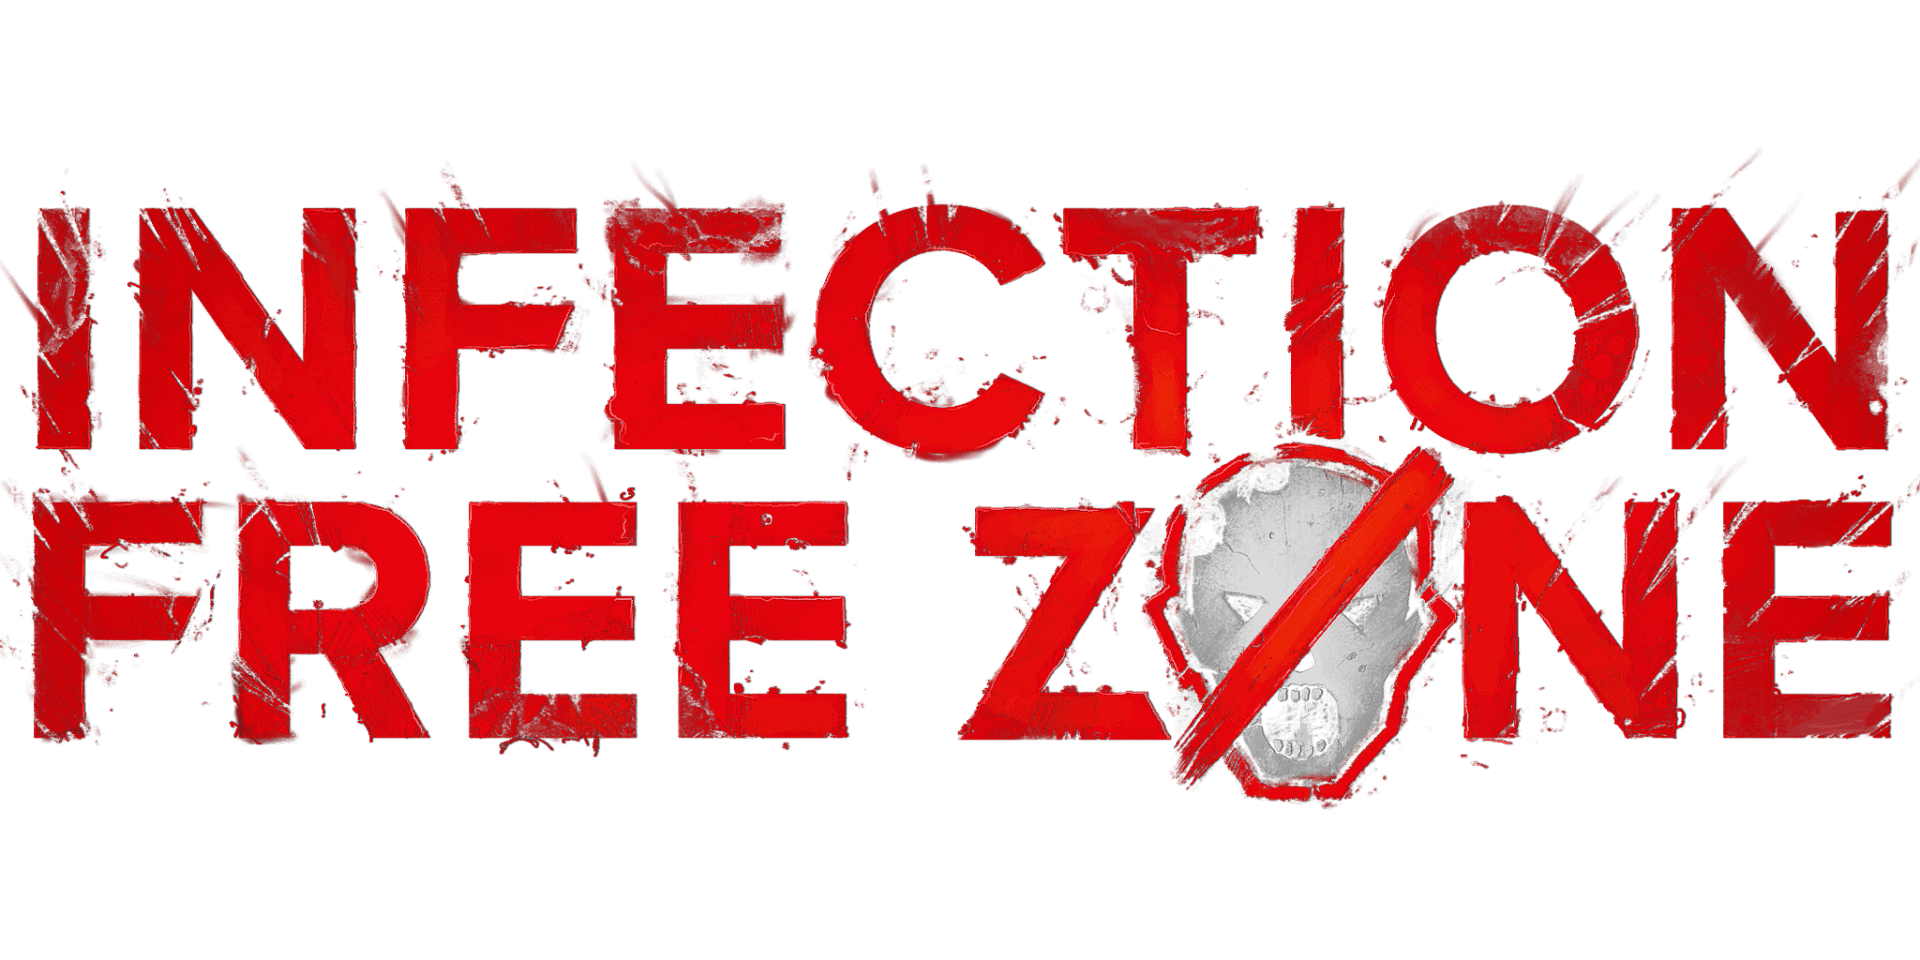 Infection Free Zone on Steam